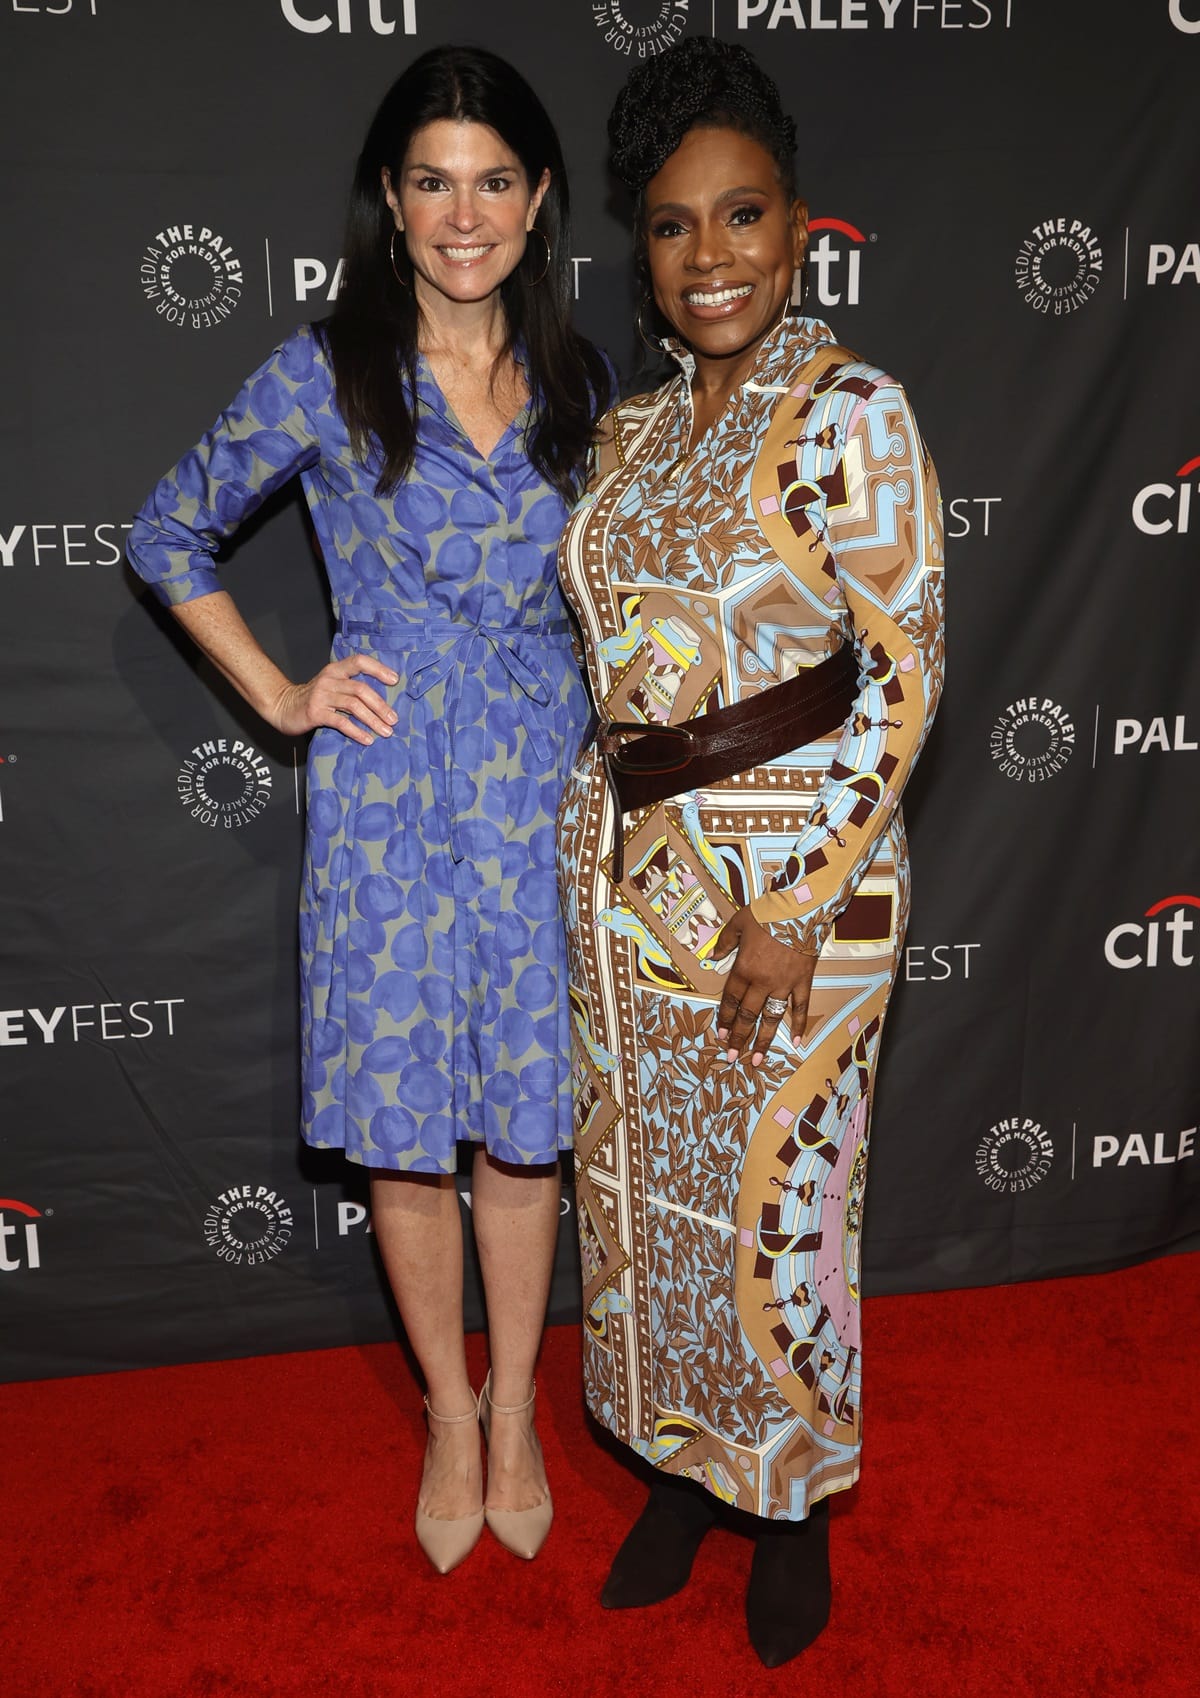 Maureen J. Reidy, the President and Chief Executive Officer of The Paley Center for Media, looks taller than actress Sheryl Lee Ralph